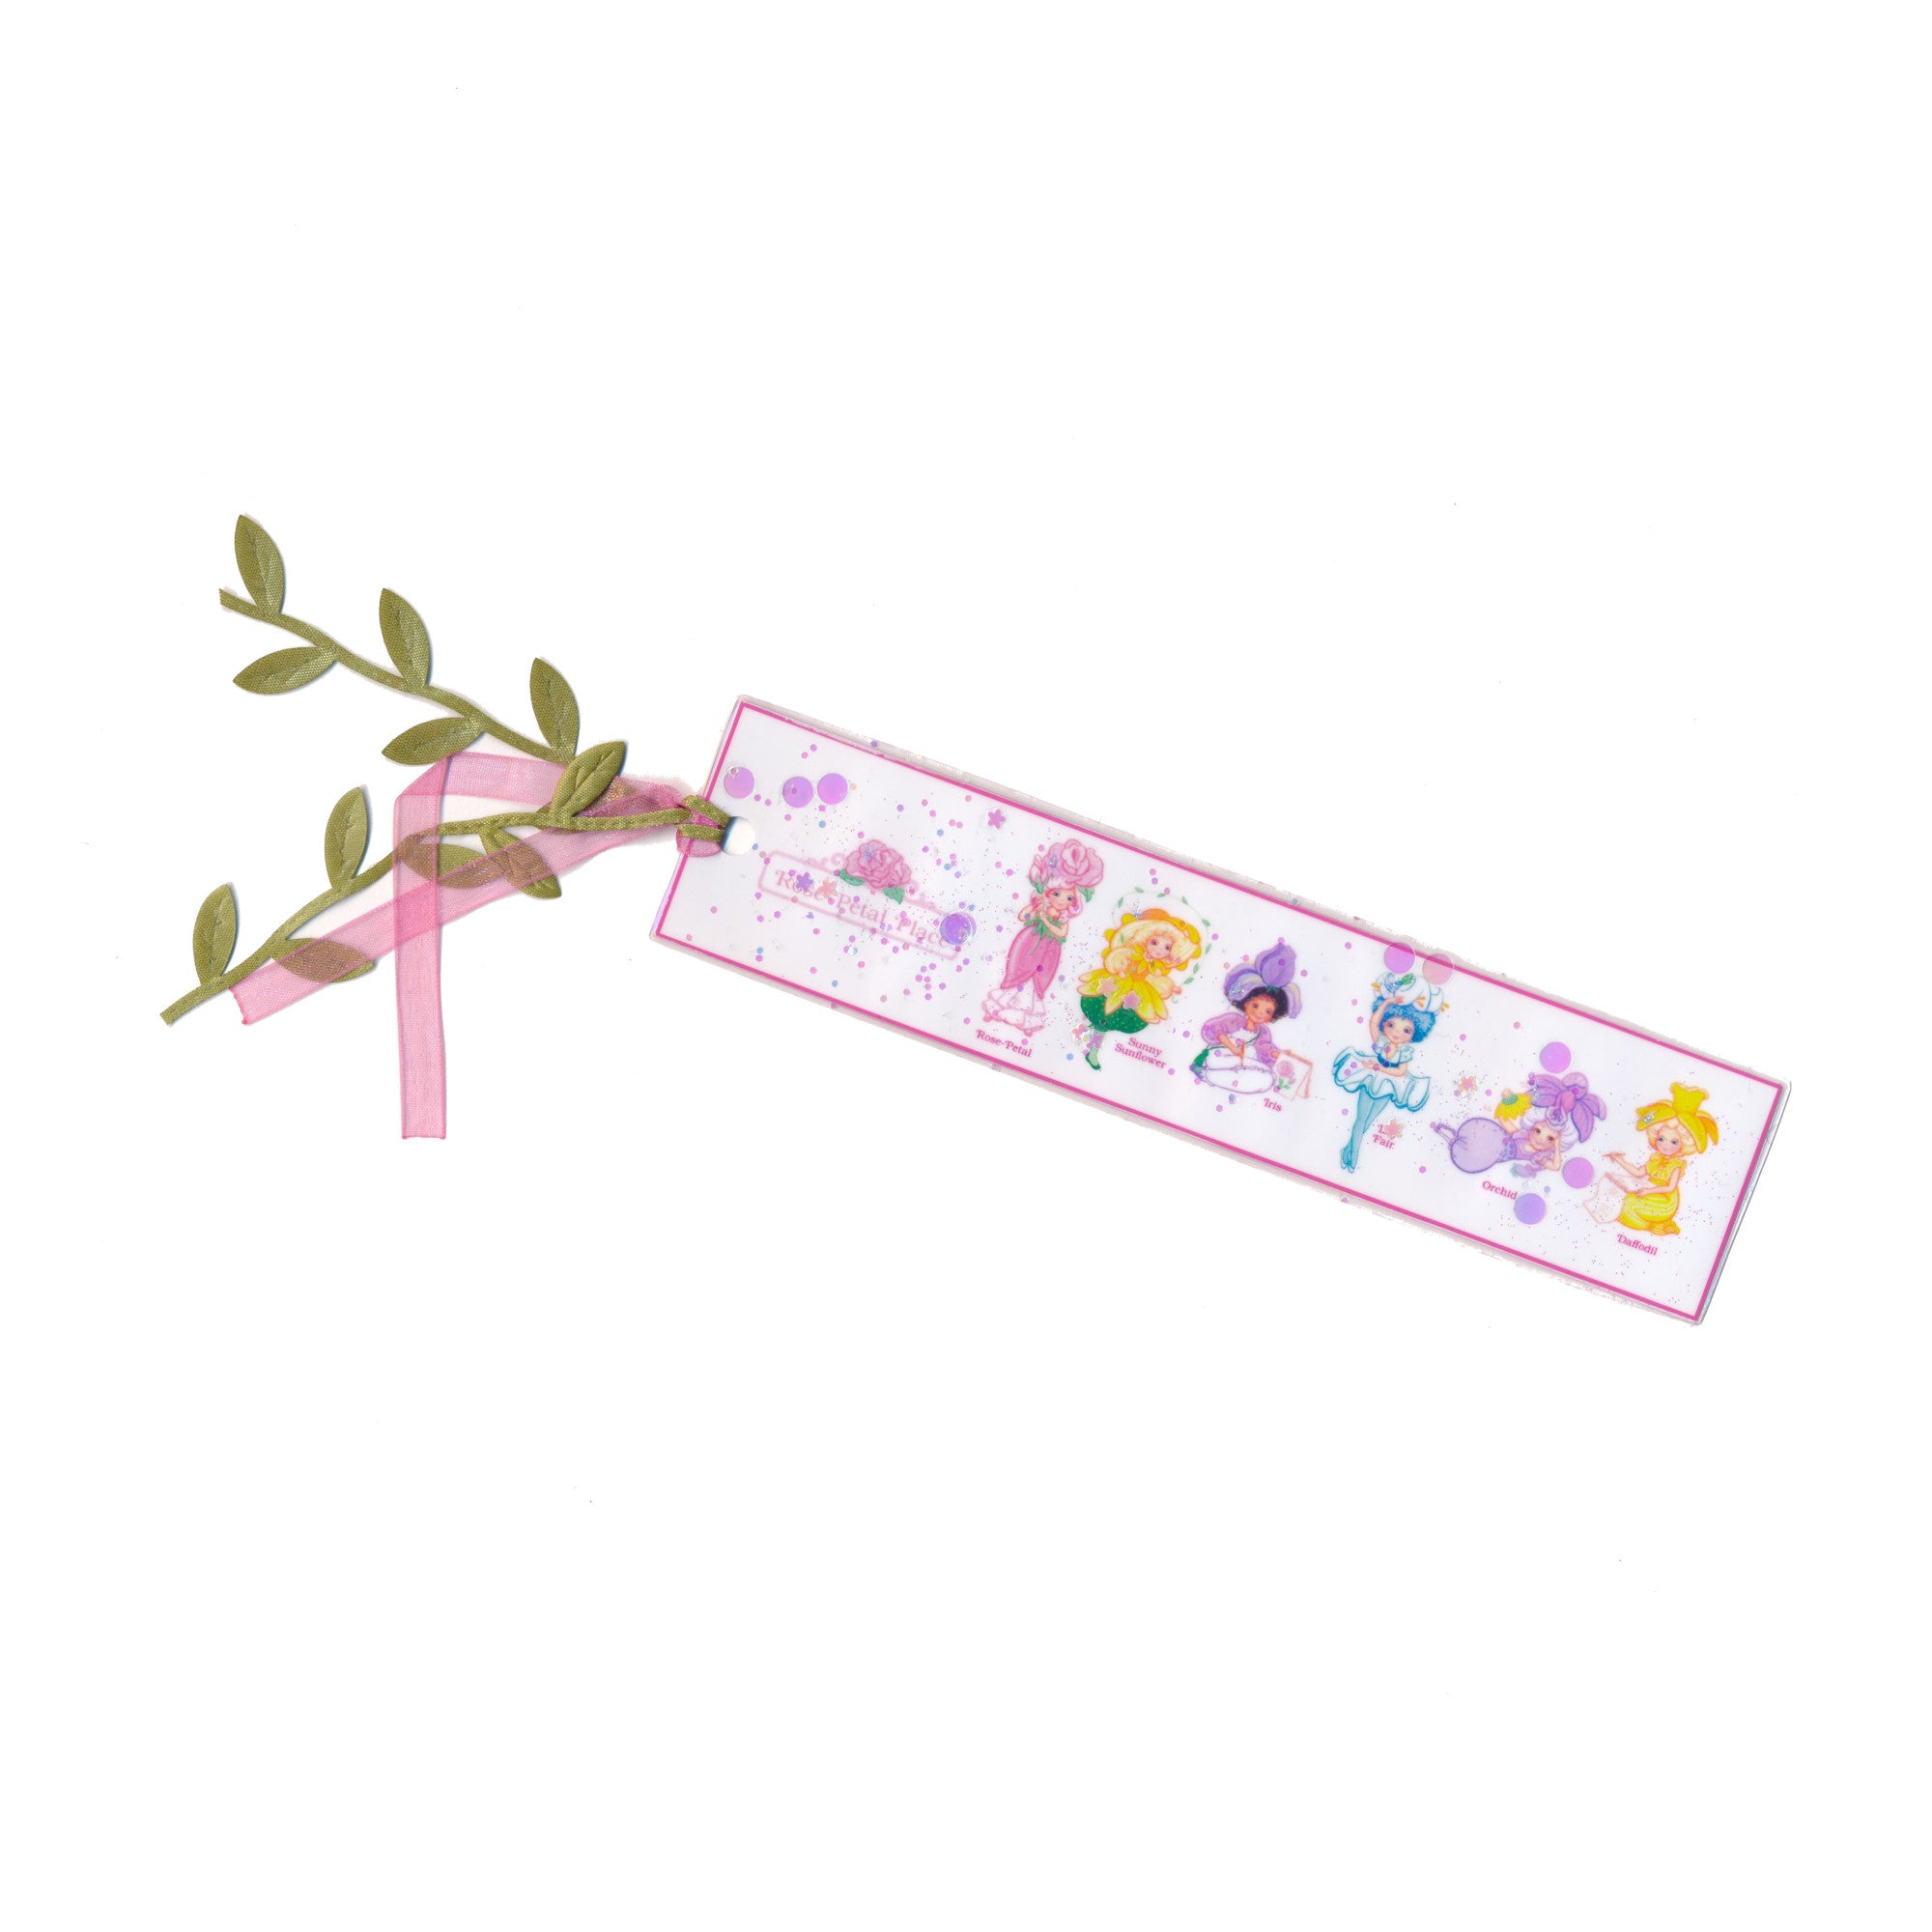 Rose Petal Place bookmark with glitter and ribbon